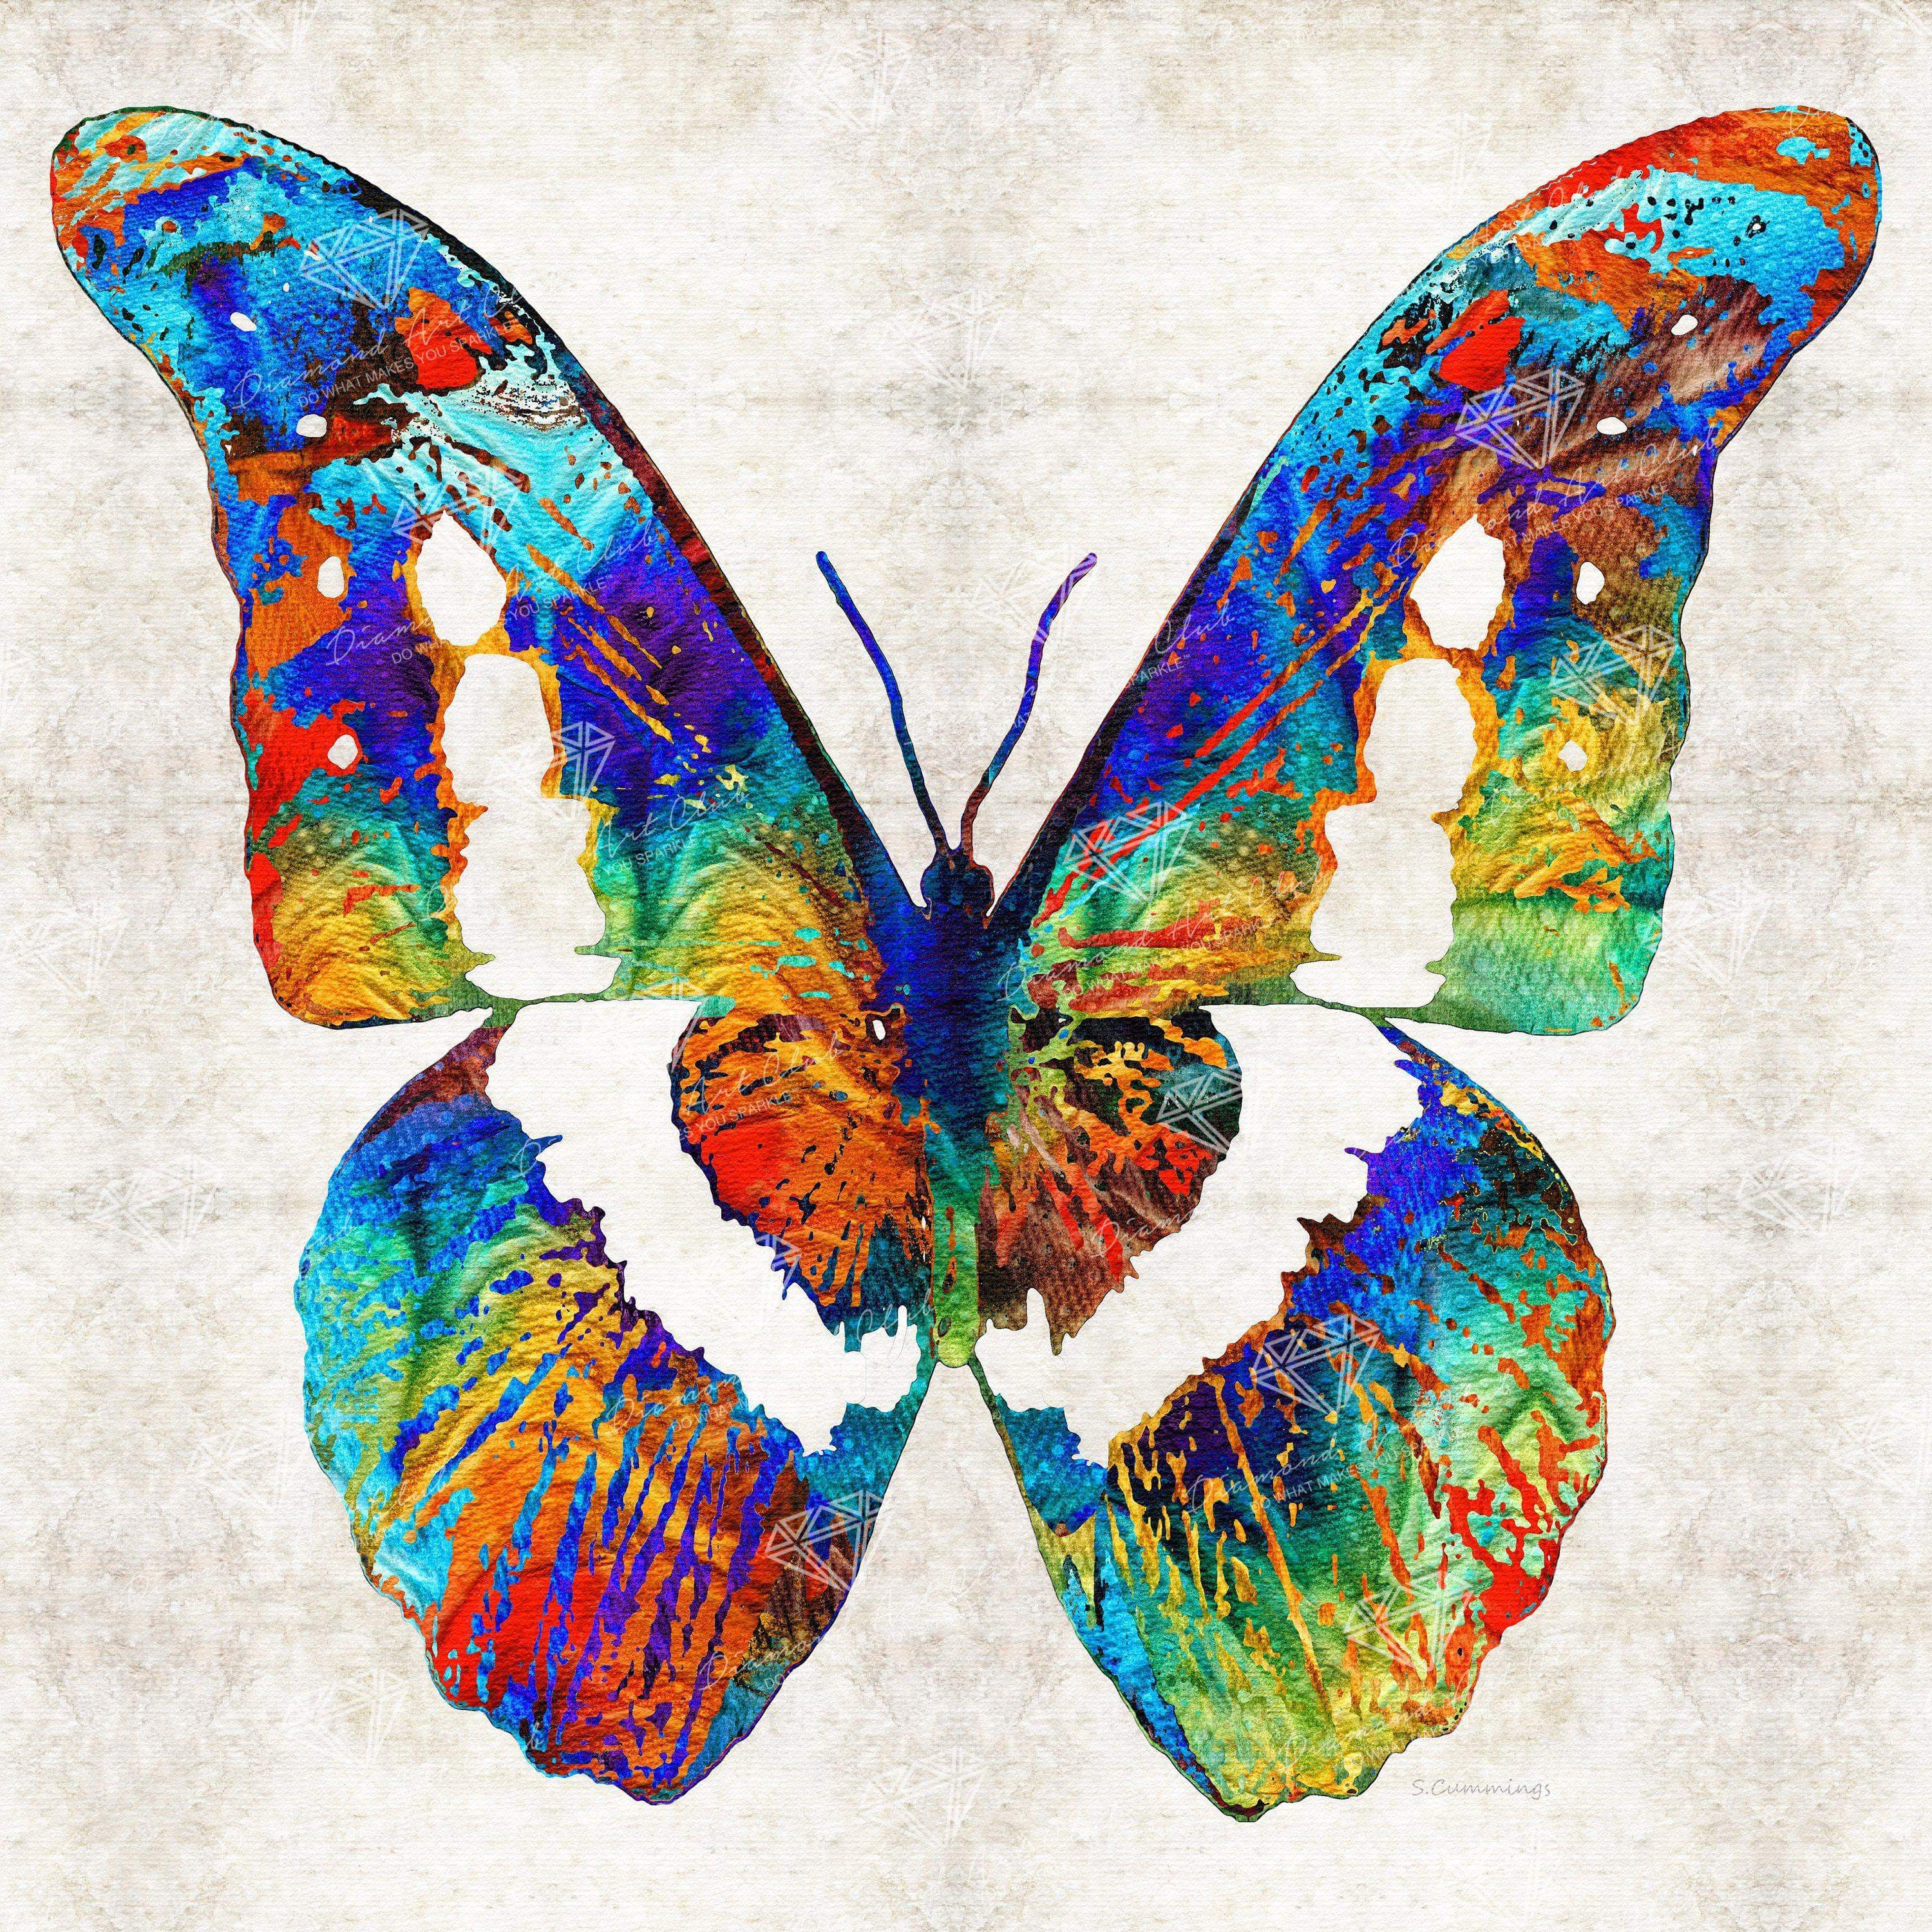 Best Diamond Painting Kits with Colorful Butterfly